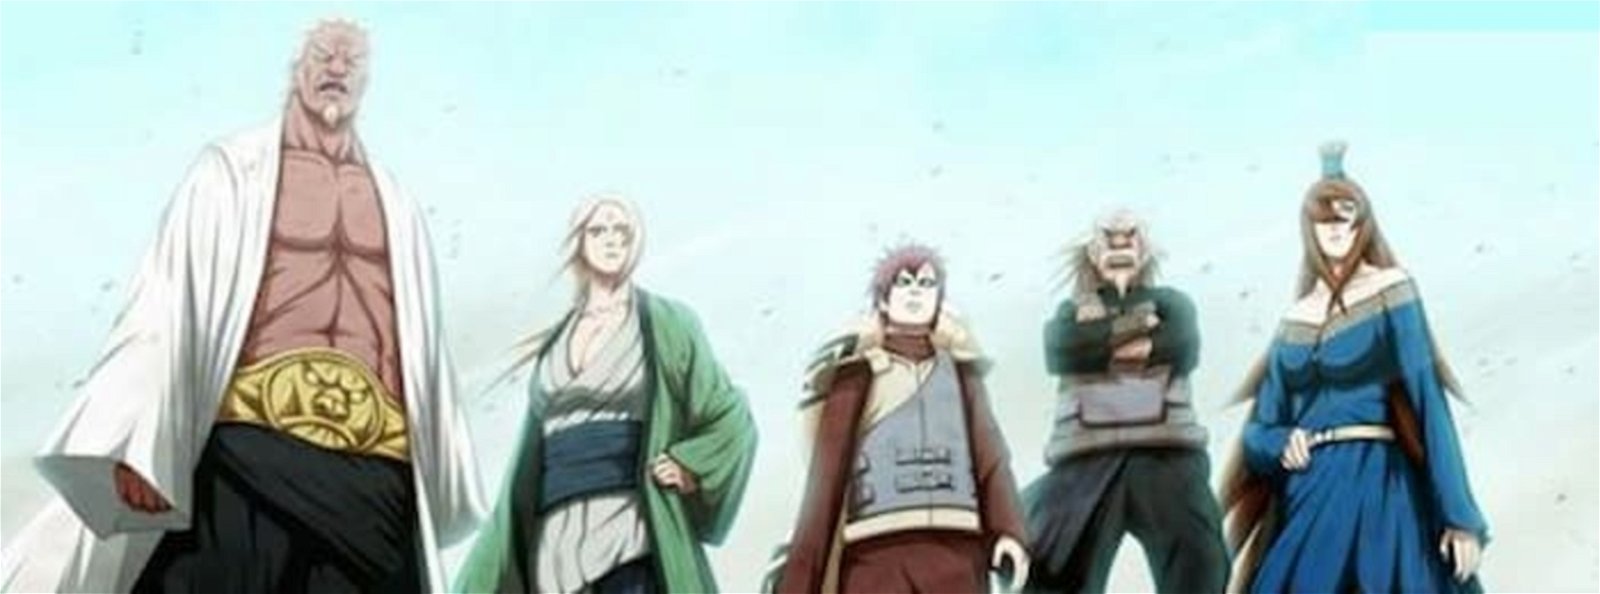 Los 5 Kages